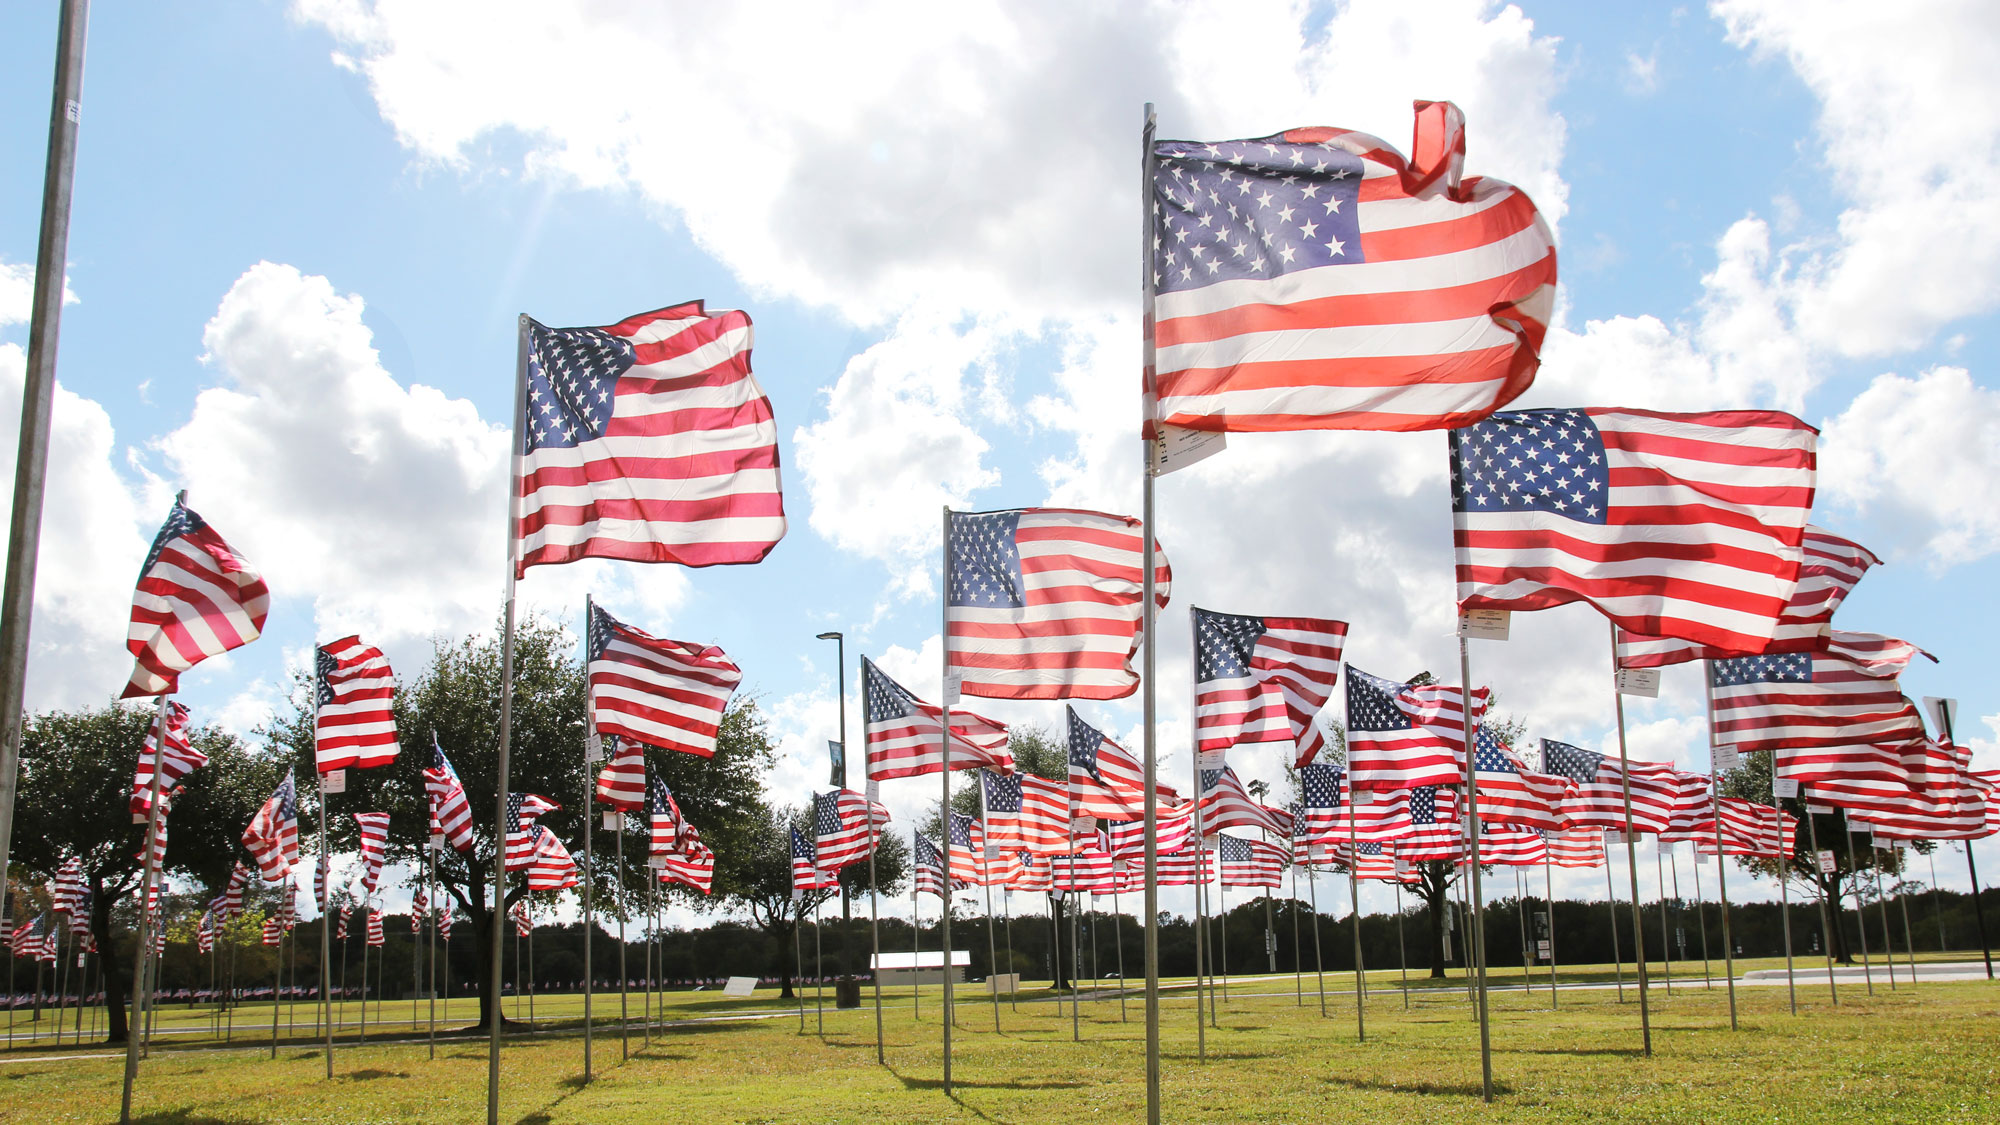 Several American flags blowing in the wind.